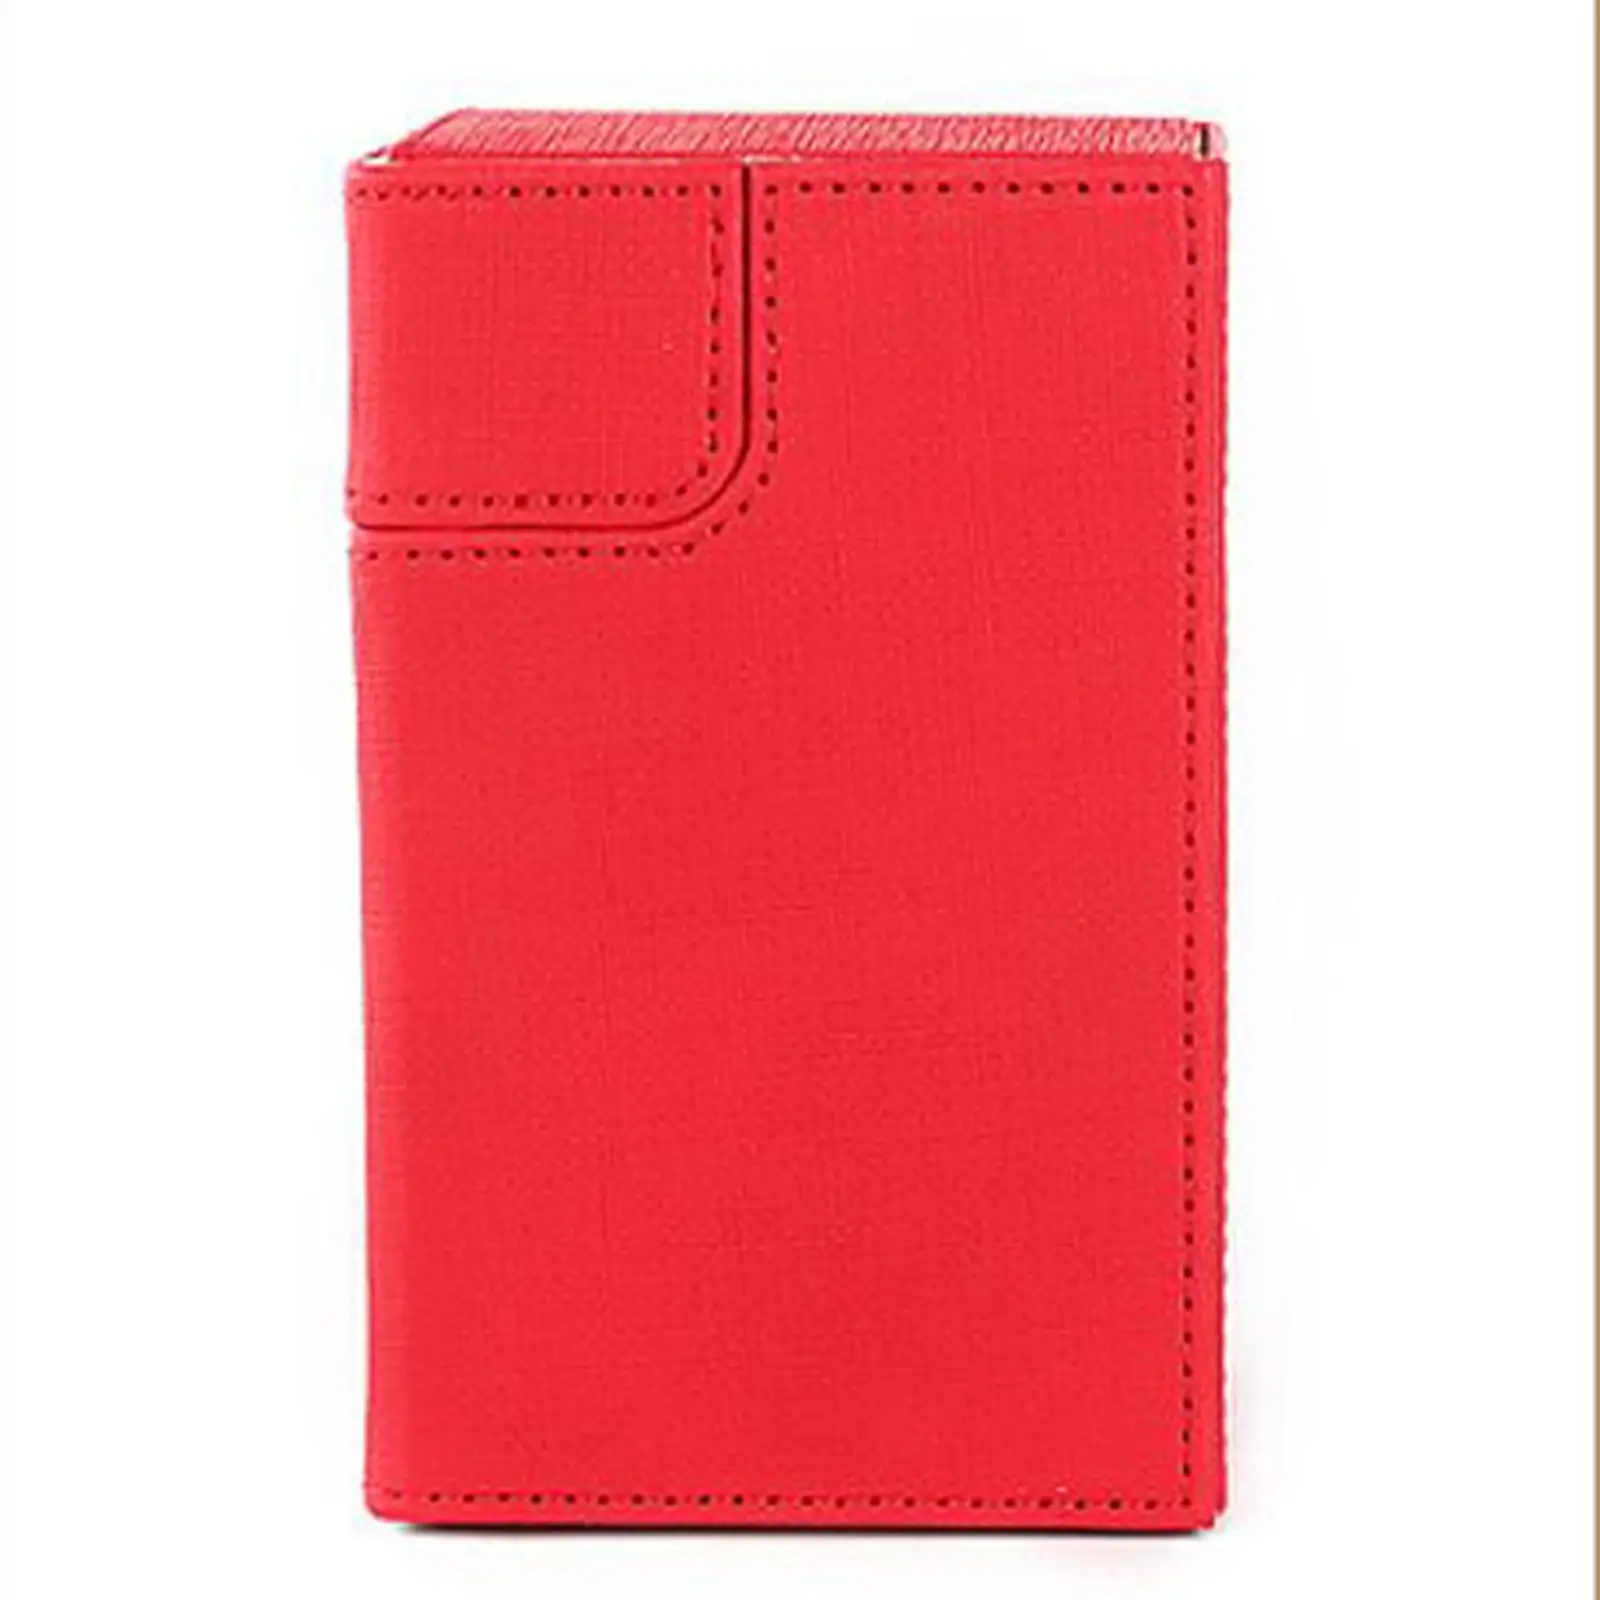 Game Card Sleeve PU Leather Deck Case Card Cover for Games Playing Cards